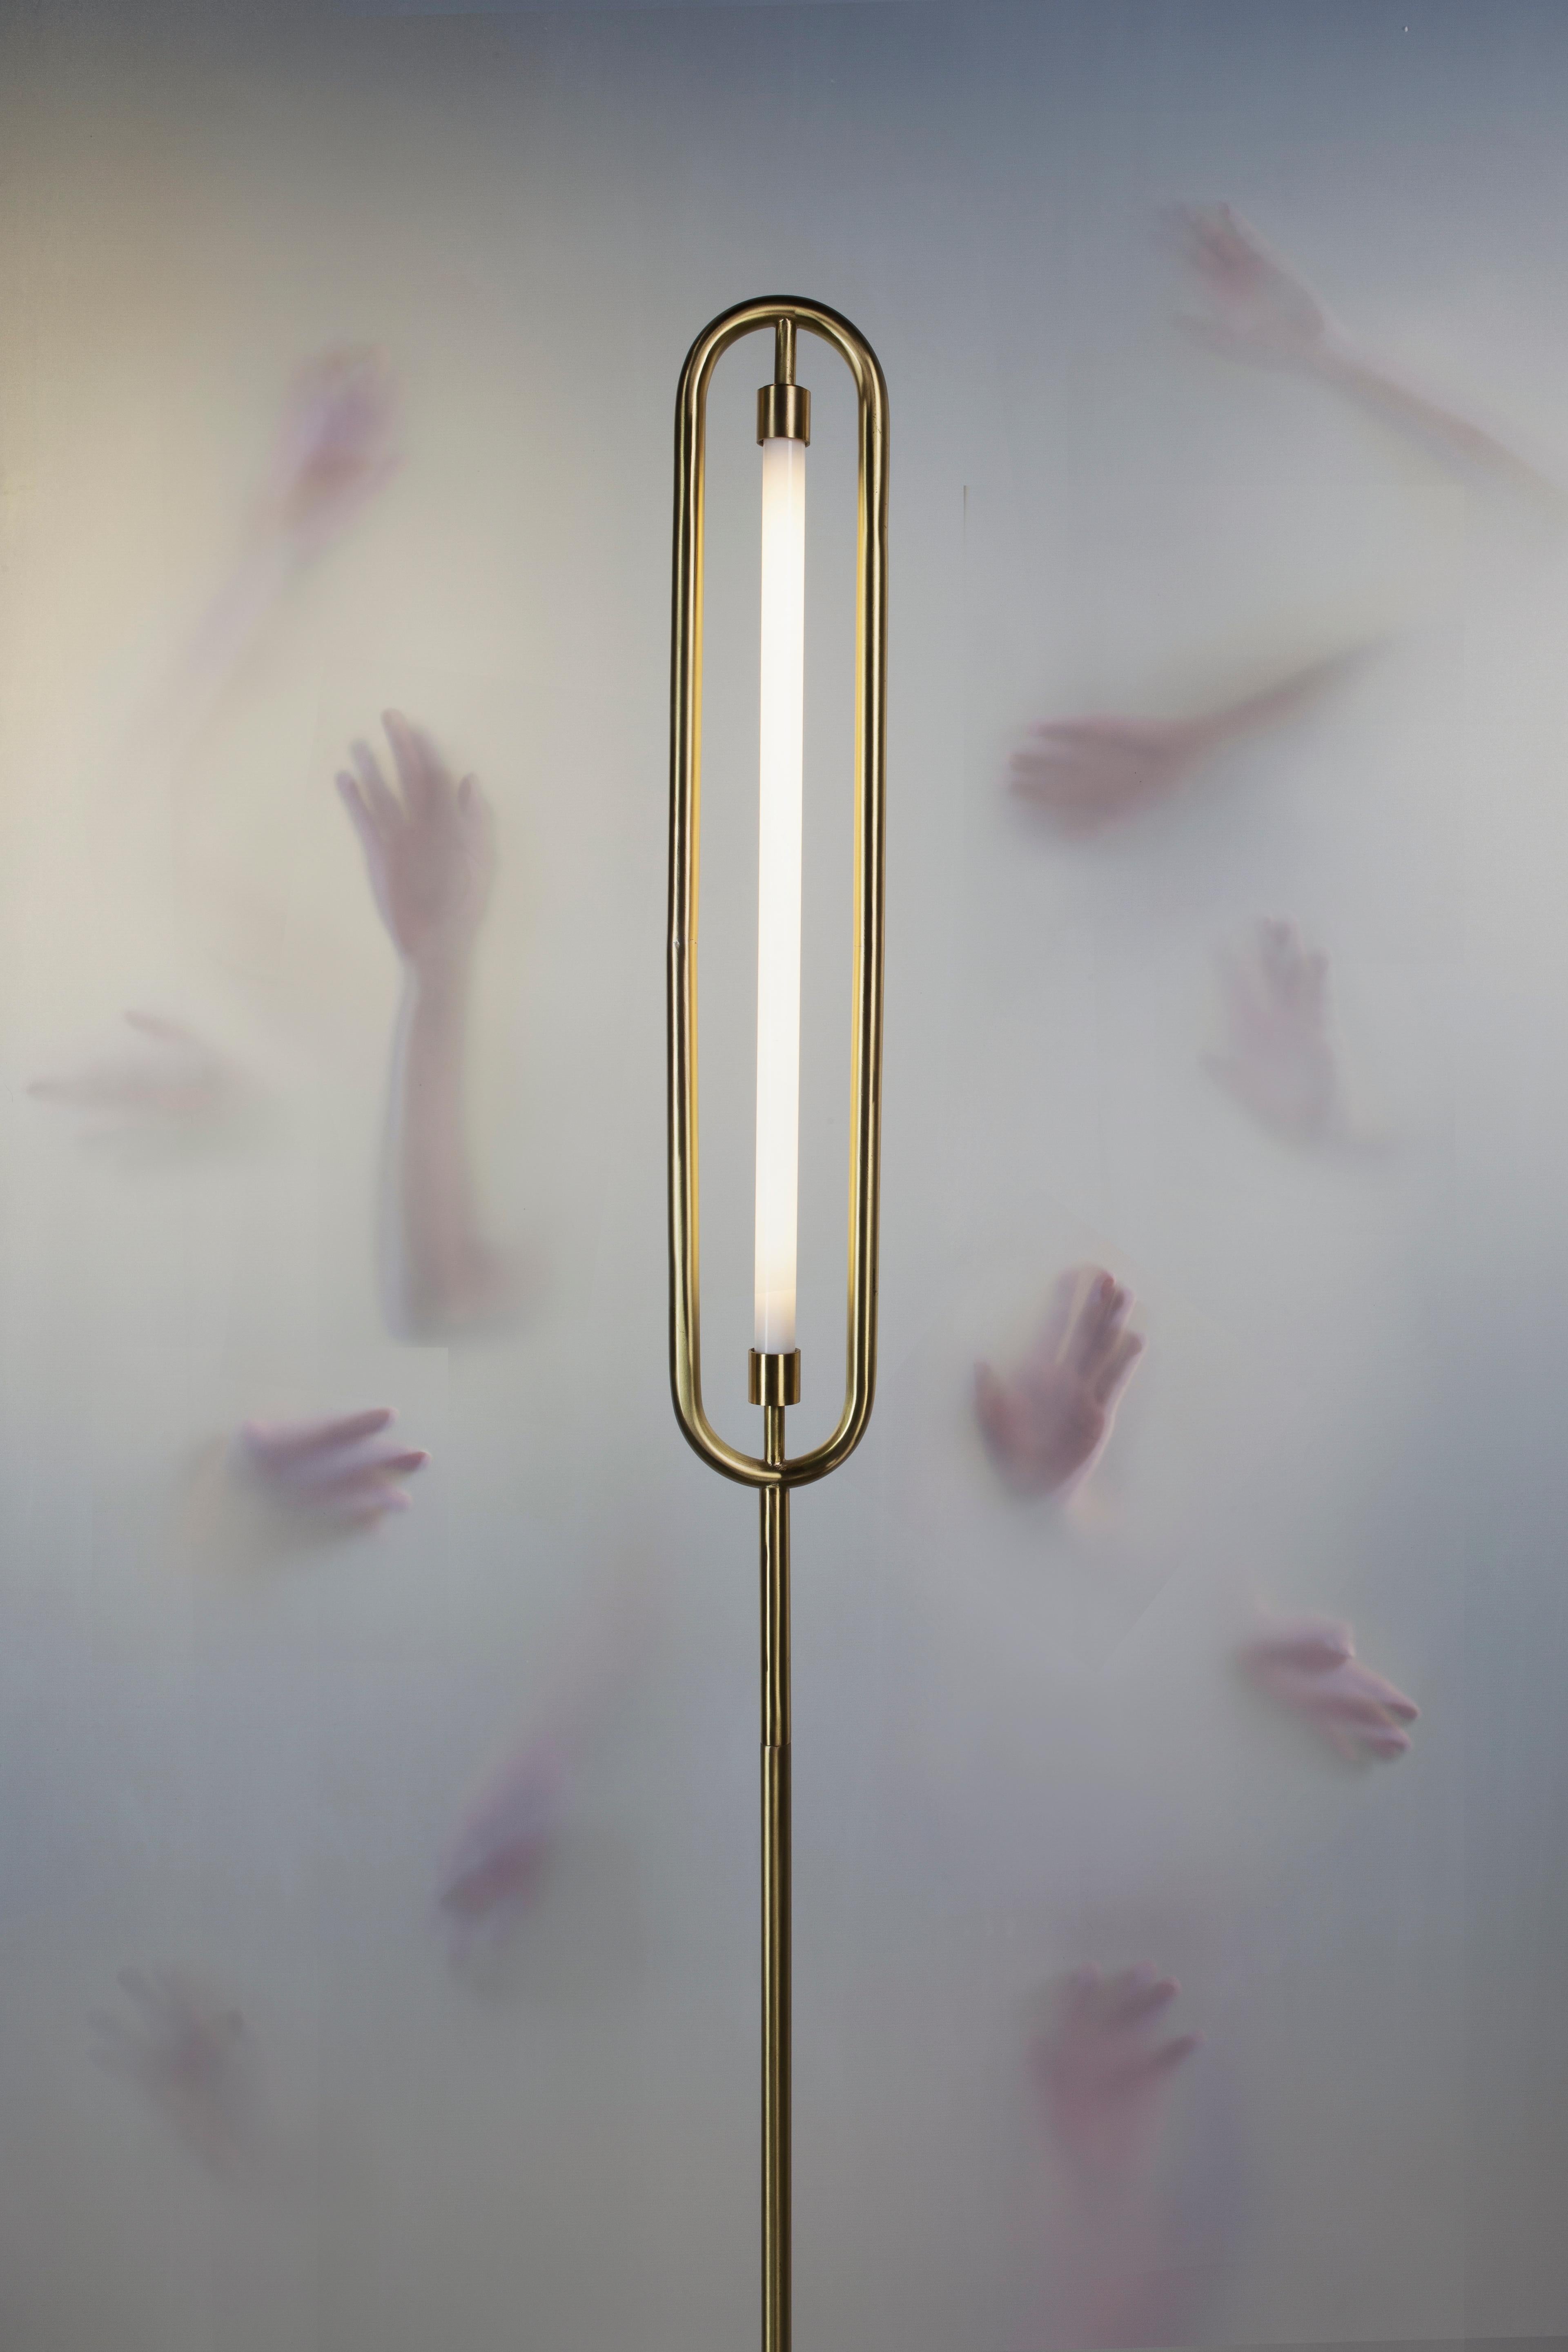 Sleek metal frames, industrially produced in true Bauhaus style, form the language of this lighting collection. The series is very versatile, can be customised to required formats and available in custom finishes. For custom proposals we request